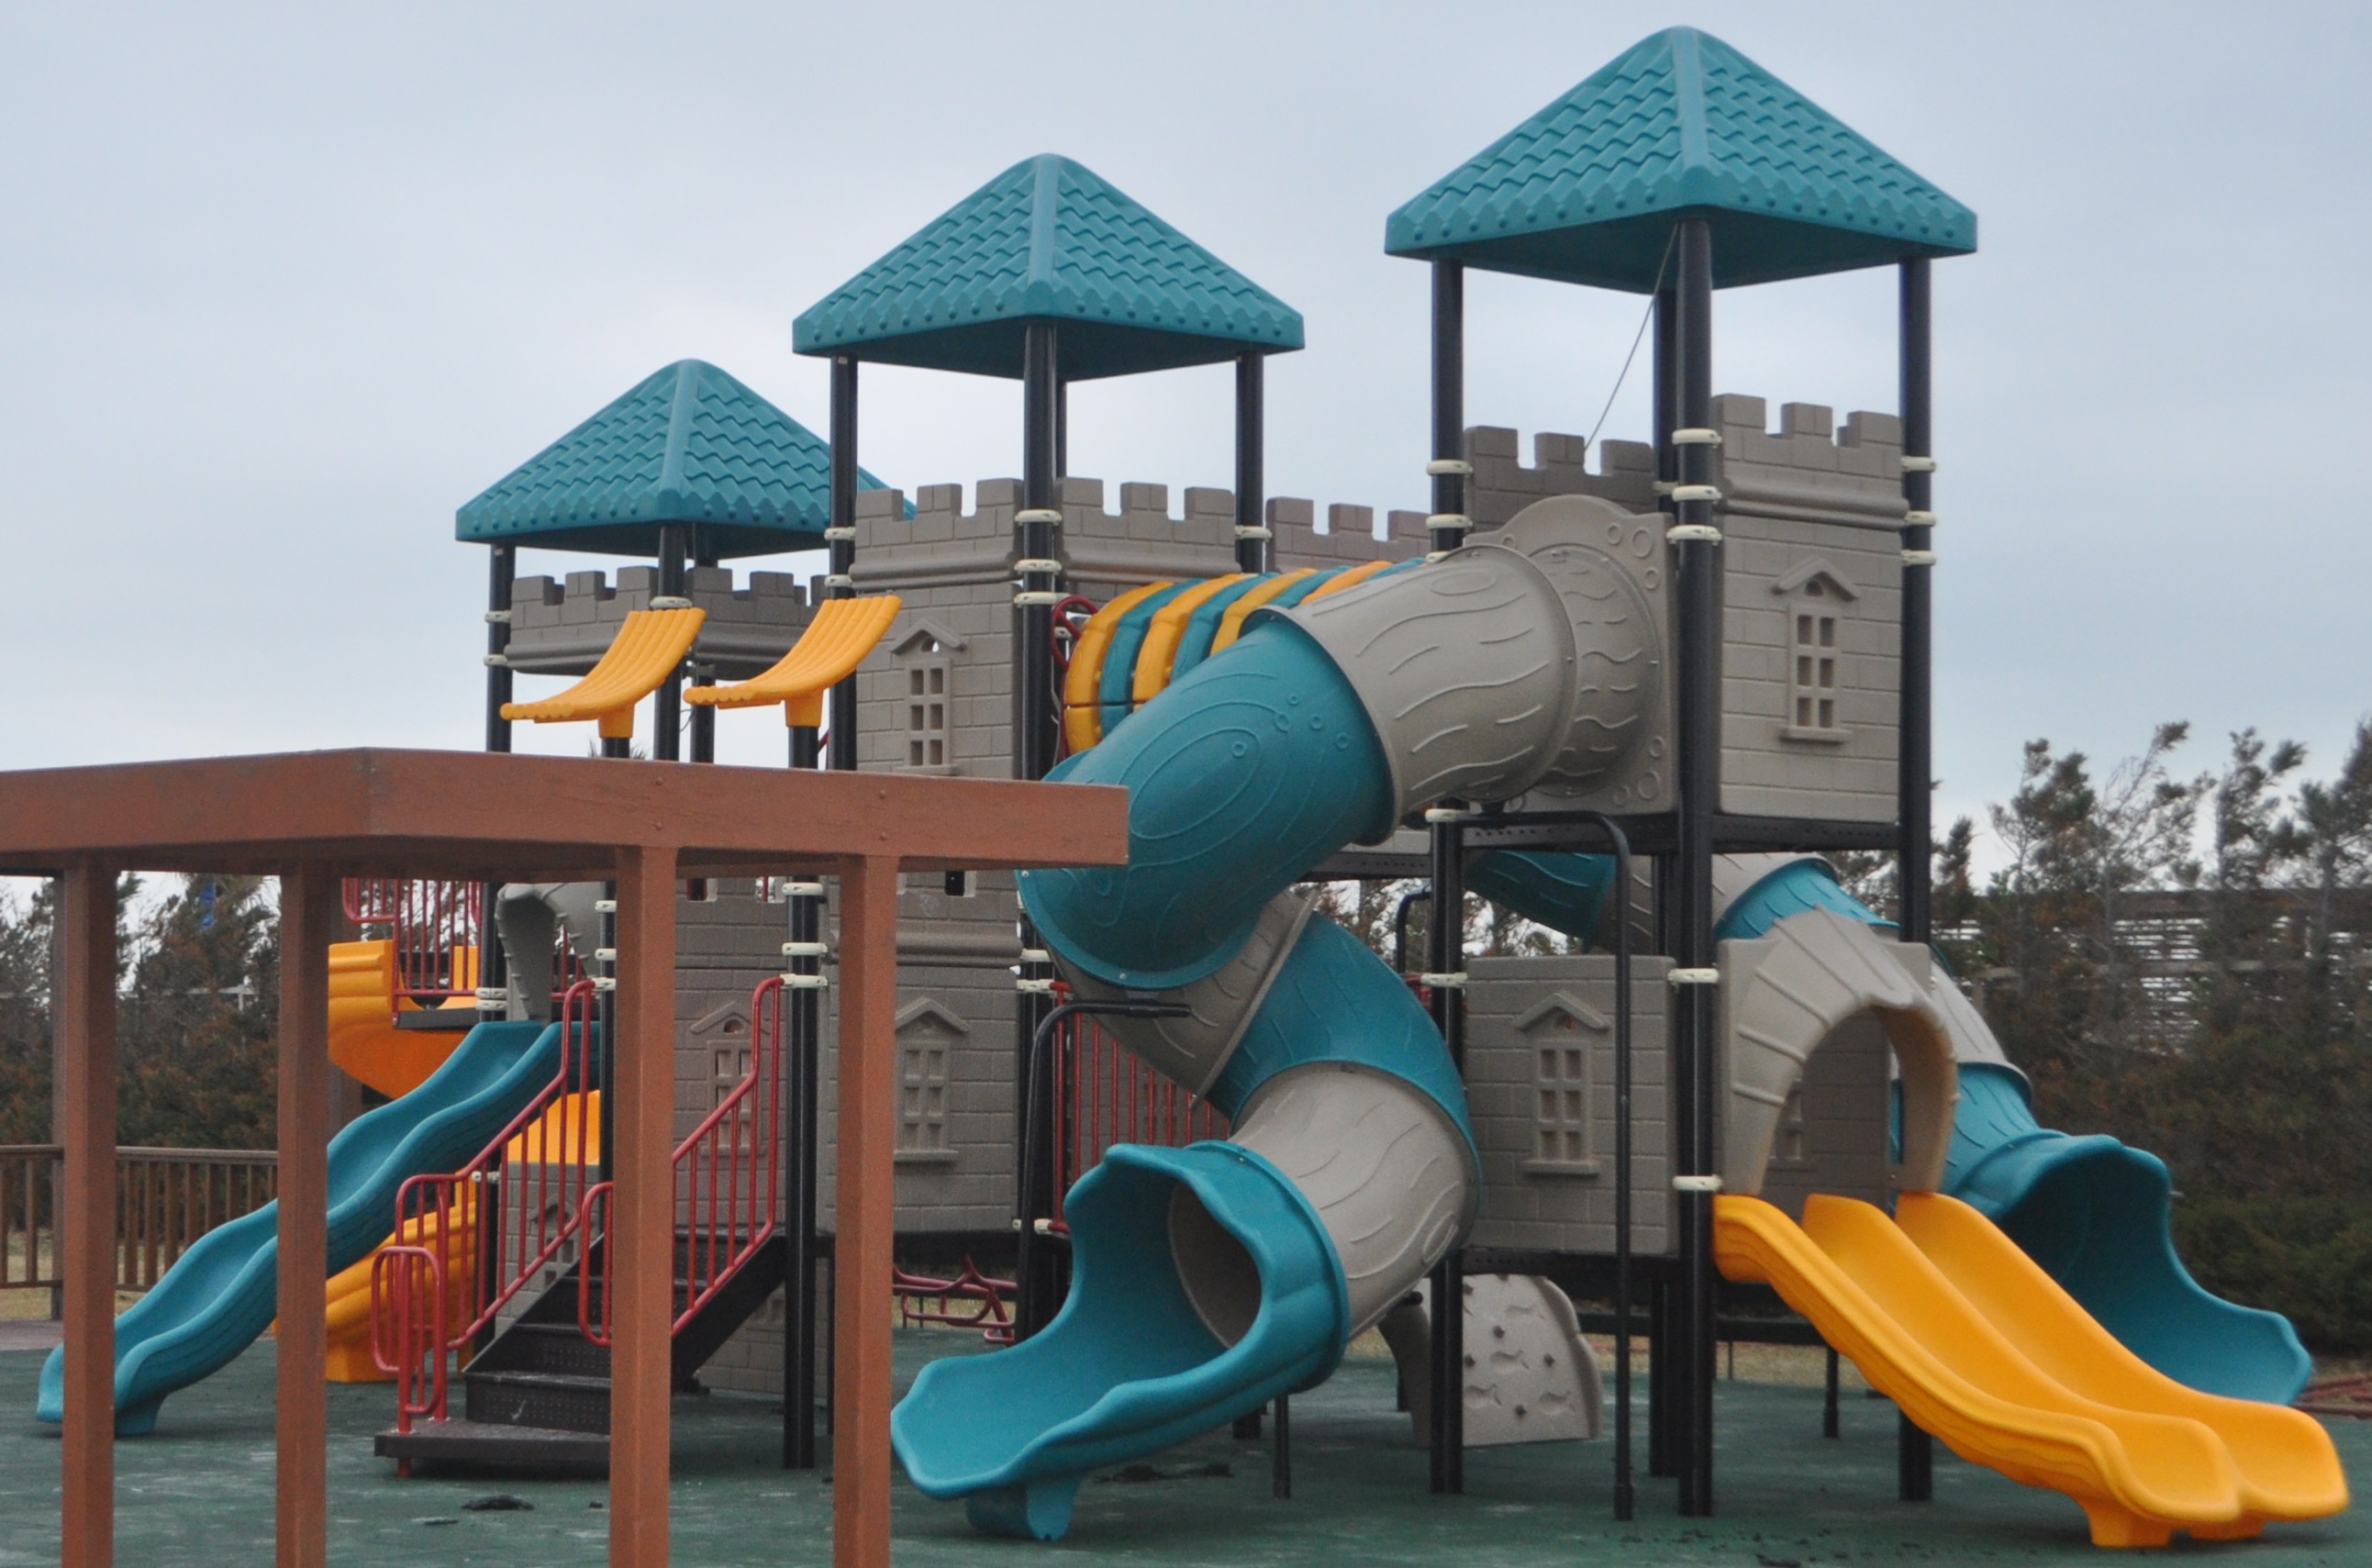 What are the advantages of non-standard custom playground?